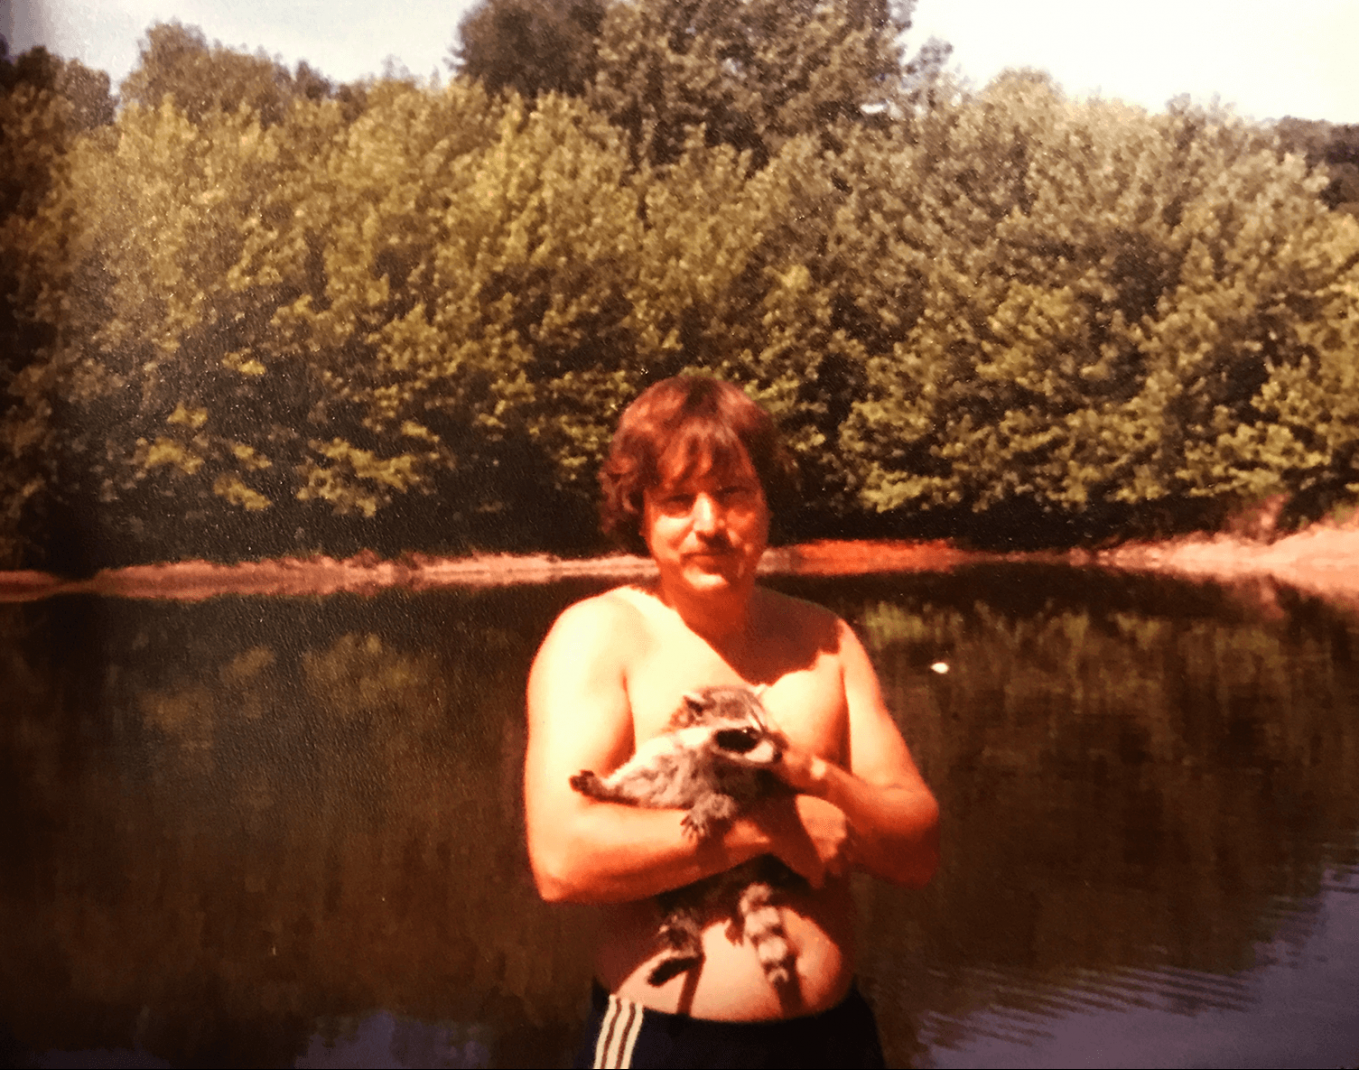 Shirtless man holding a small raccoon, a body of water in the background.